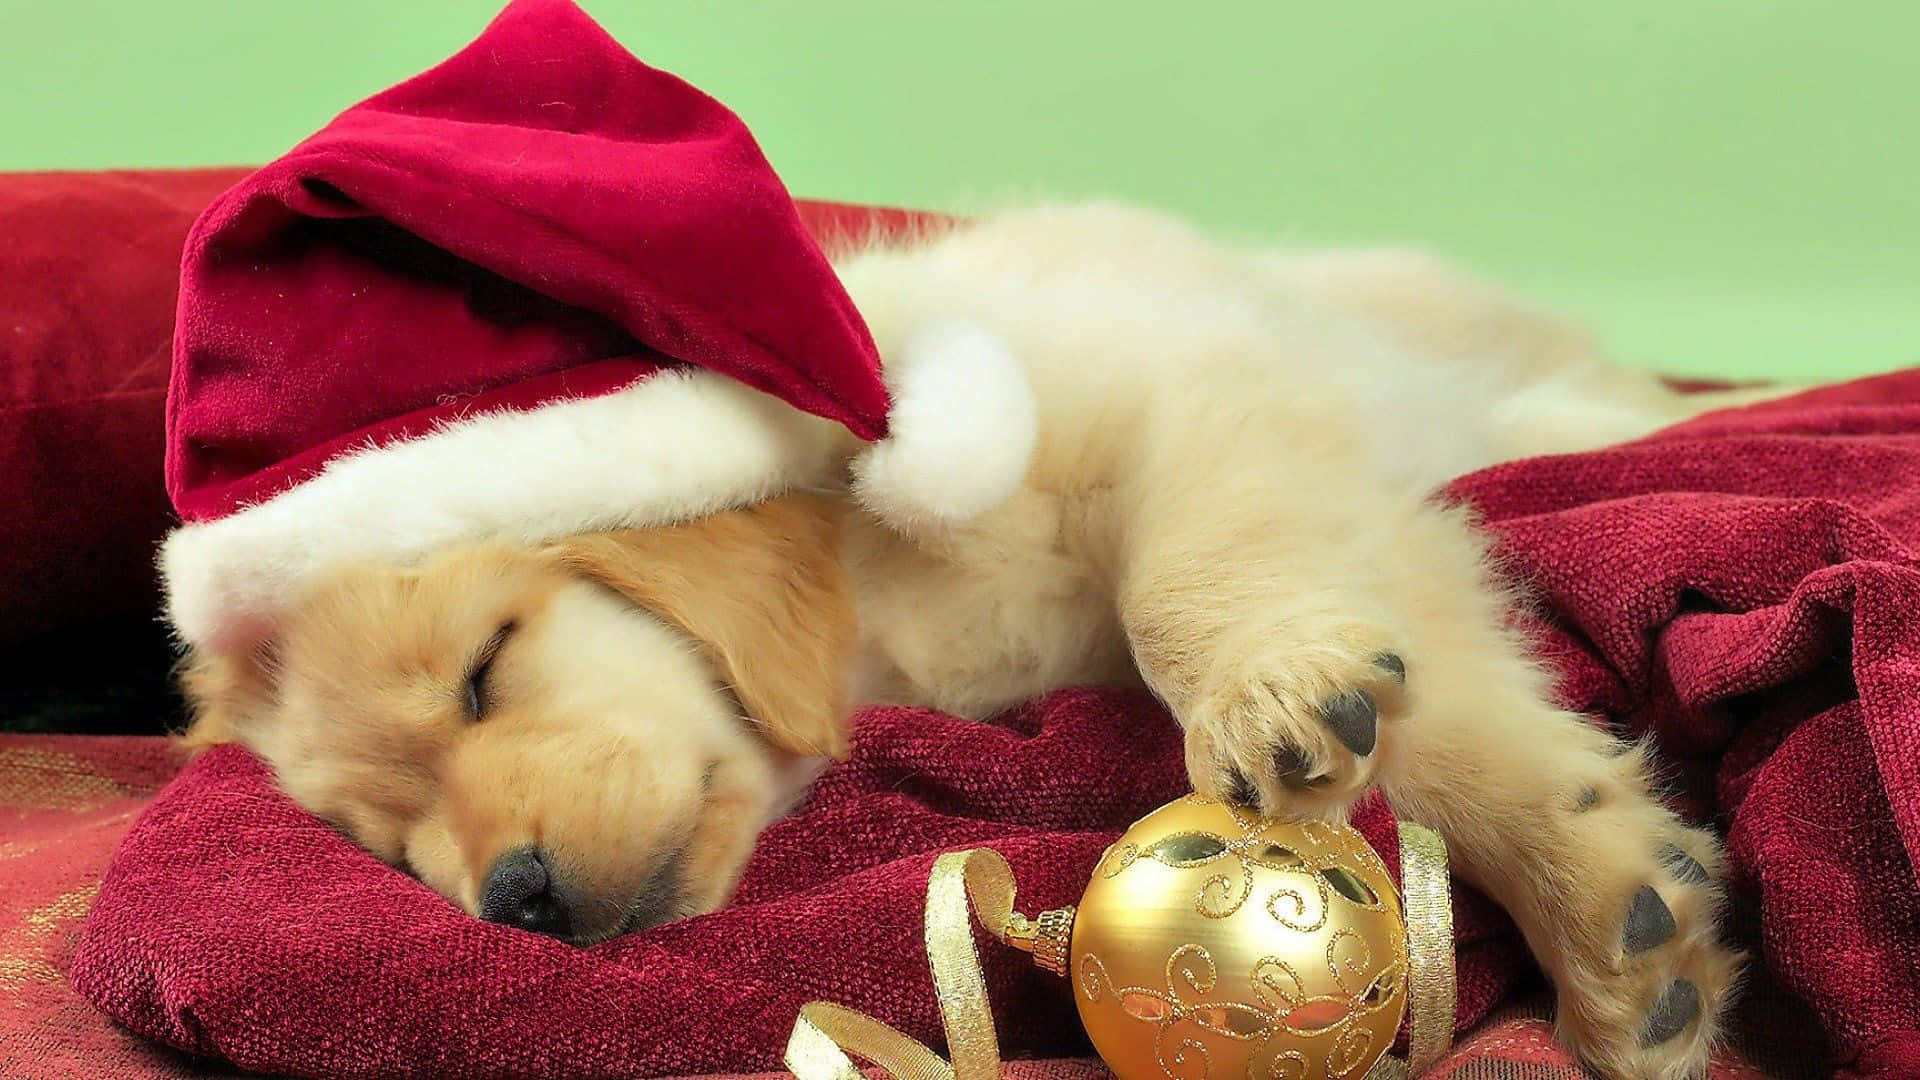 A Puppy Sleeping On A Red Blanket Wallpaper